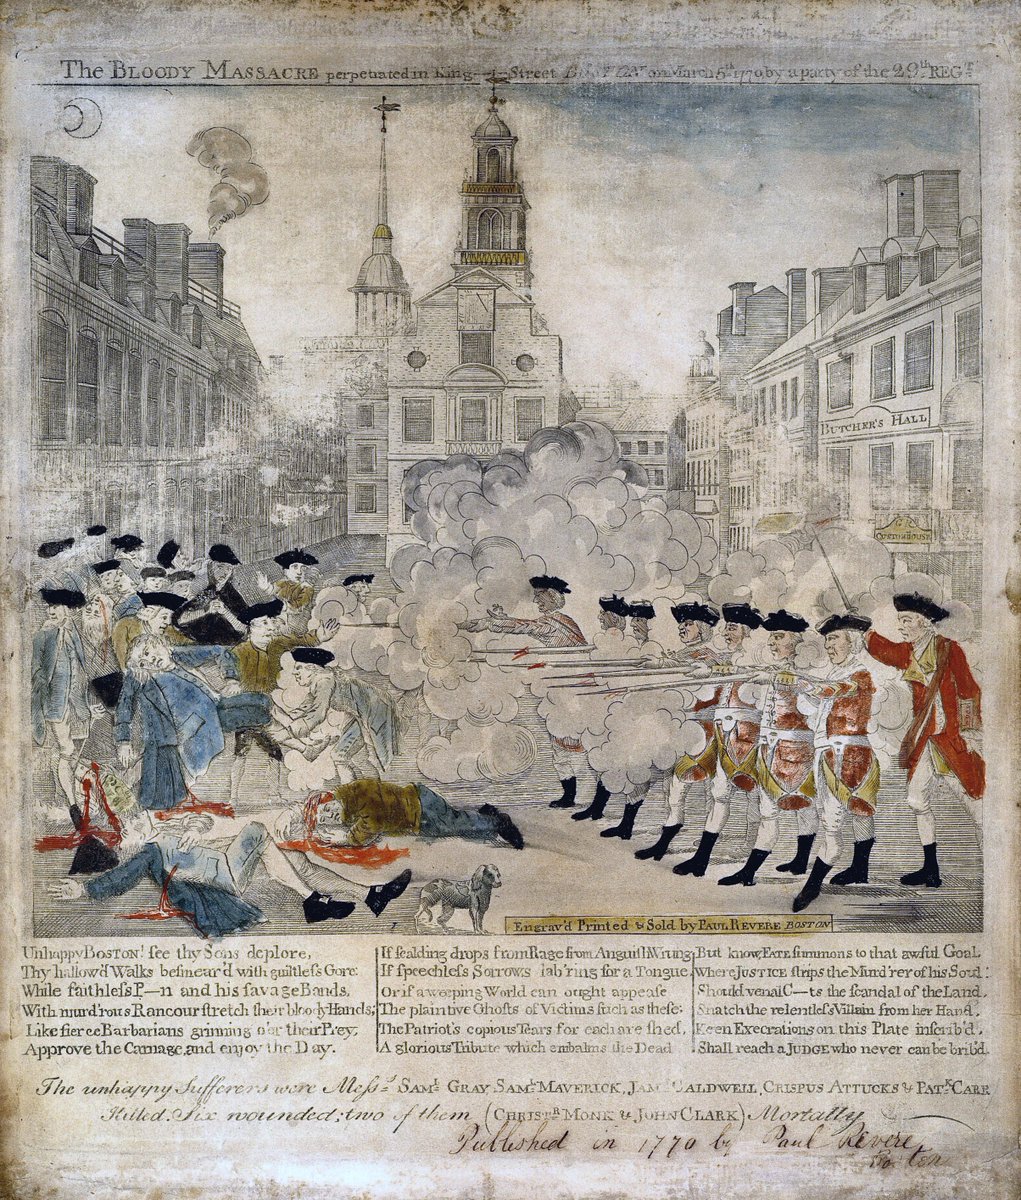 the Old State House was, as it happened, where things really started to go to shit when, in the square in front of it in 1770, British soldiers shot a bunch of townspeople. here it is, depicted in an engraving by inescapable Boston figure Paul Revere: